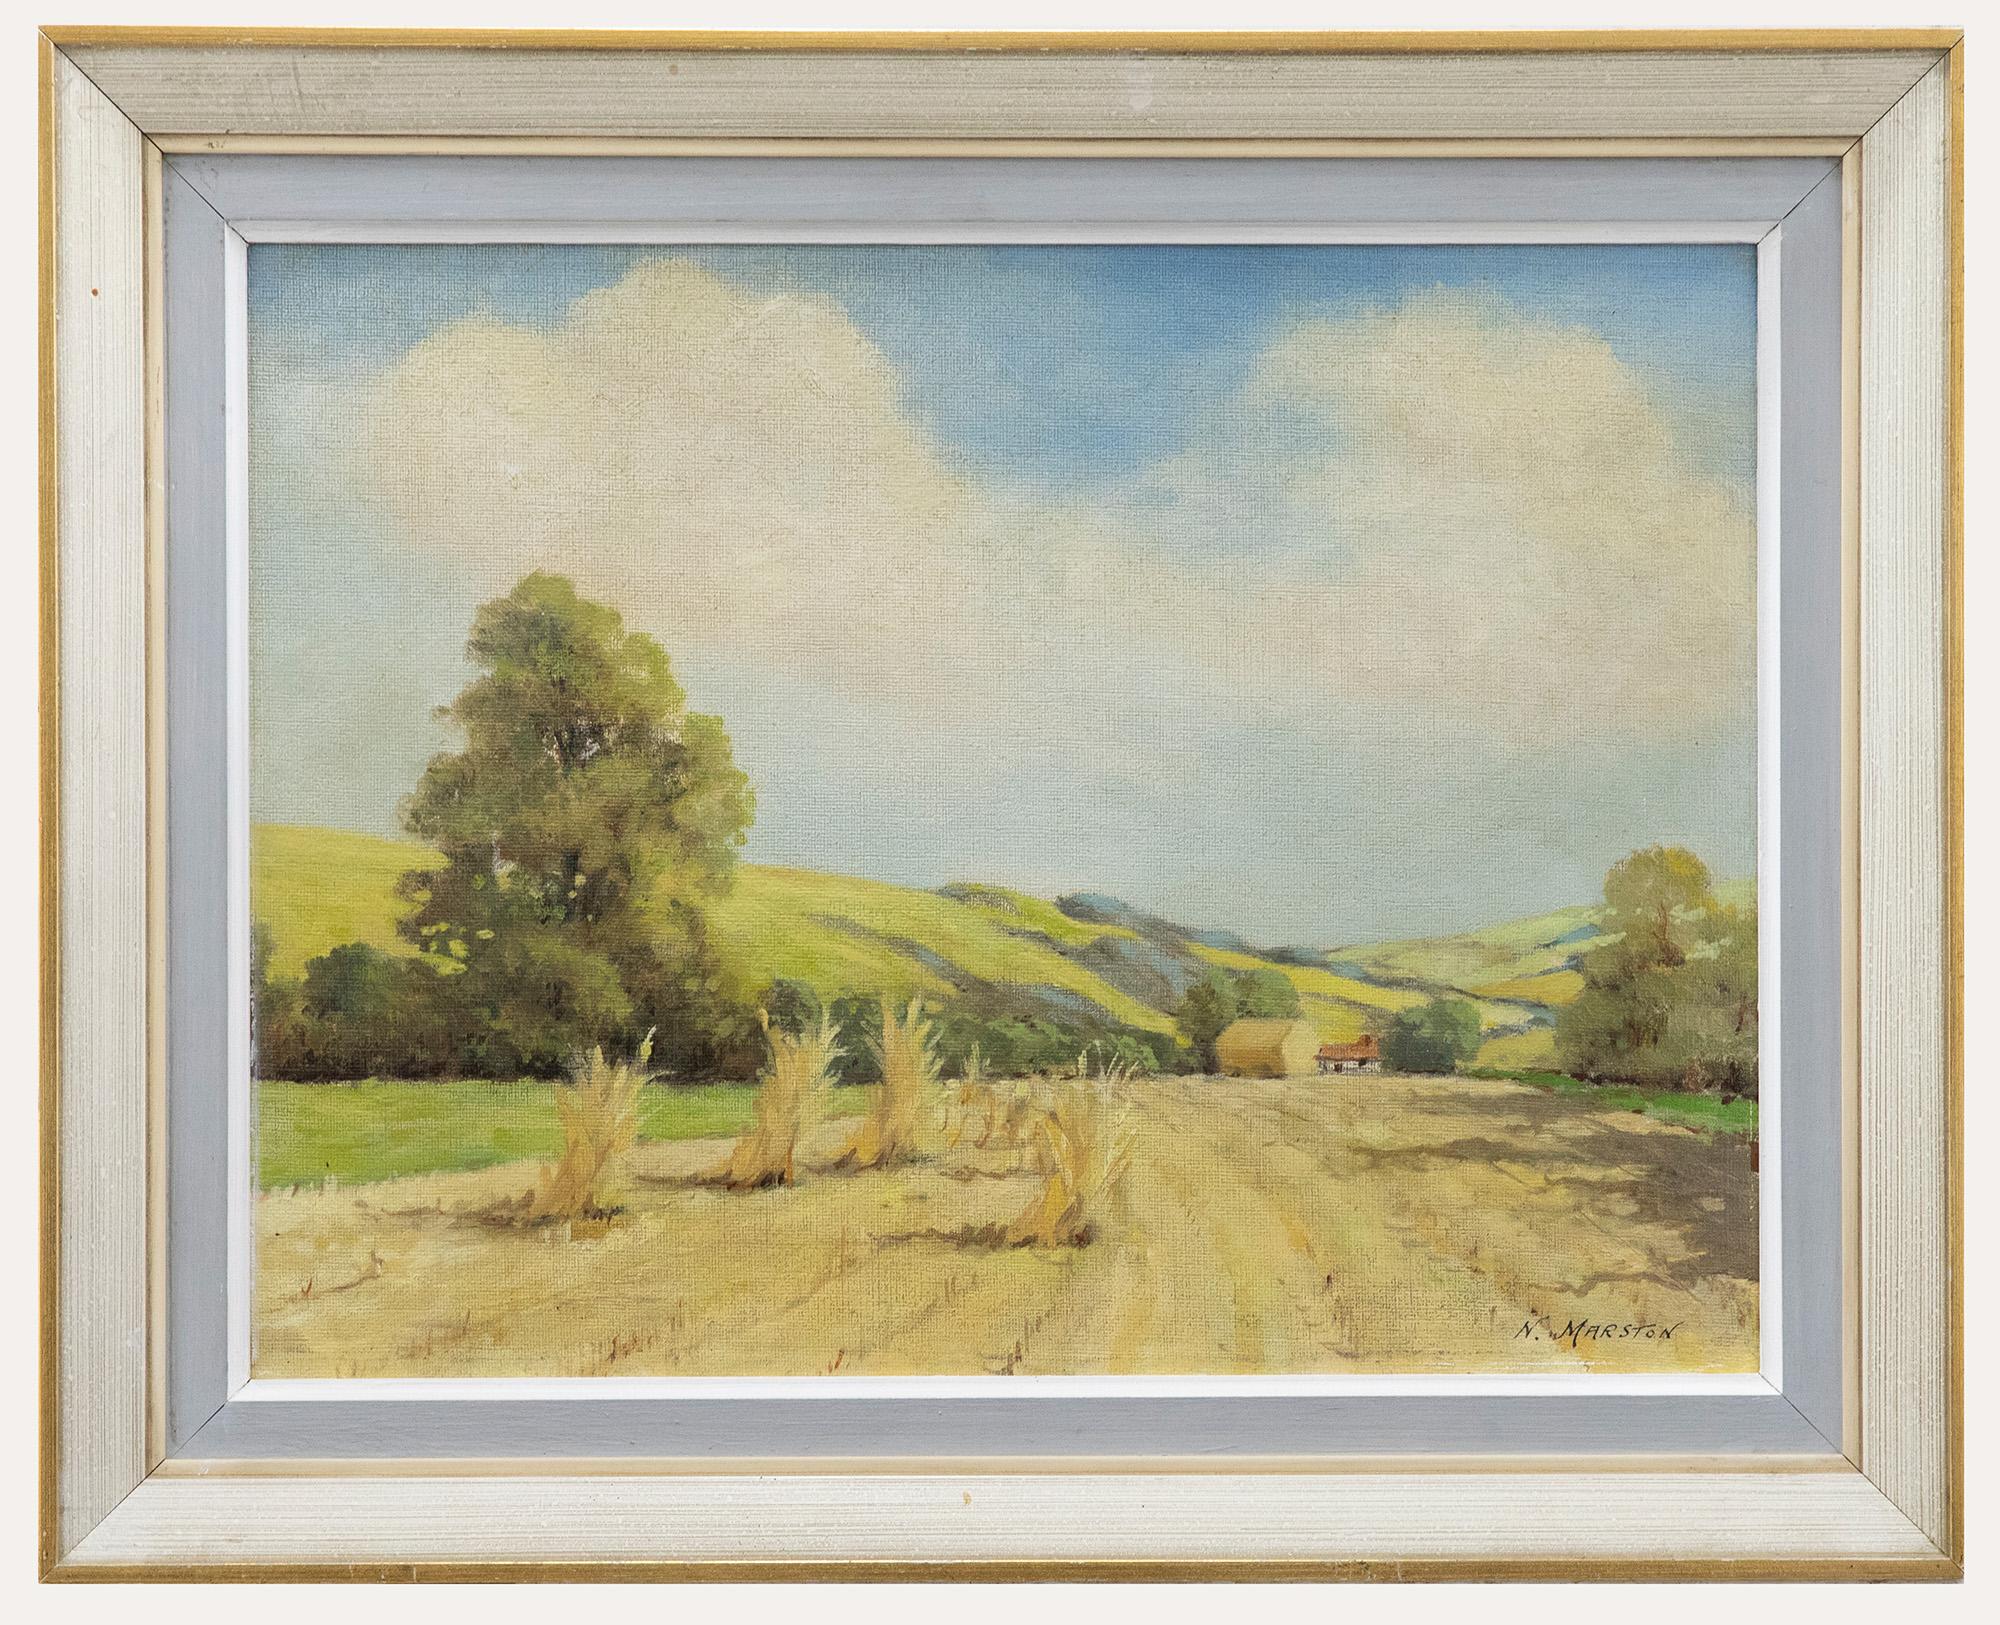 Unknown Landscape Painting - N. Marston - Framed 20th Century Oil, Last of the Wheat